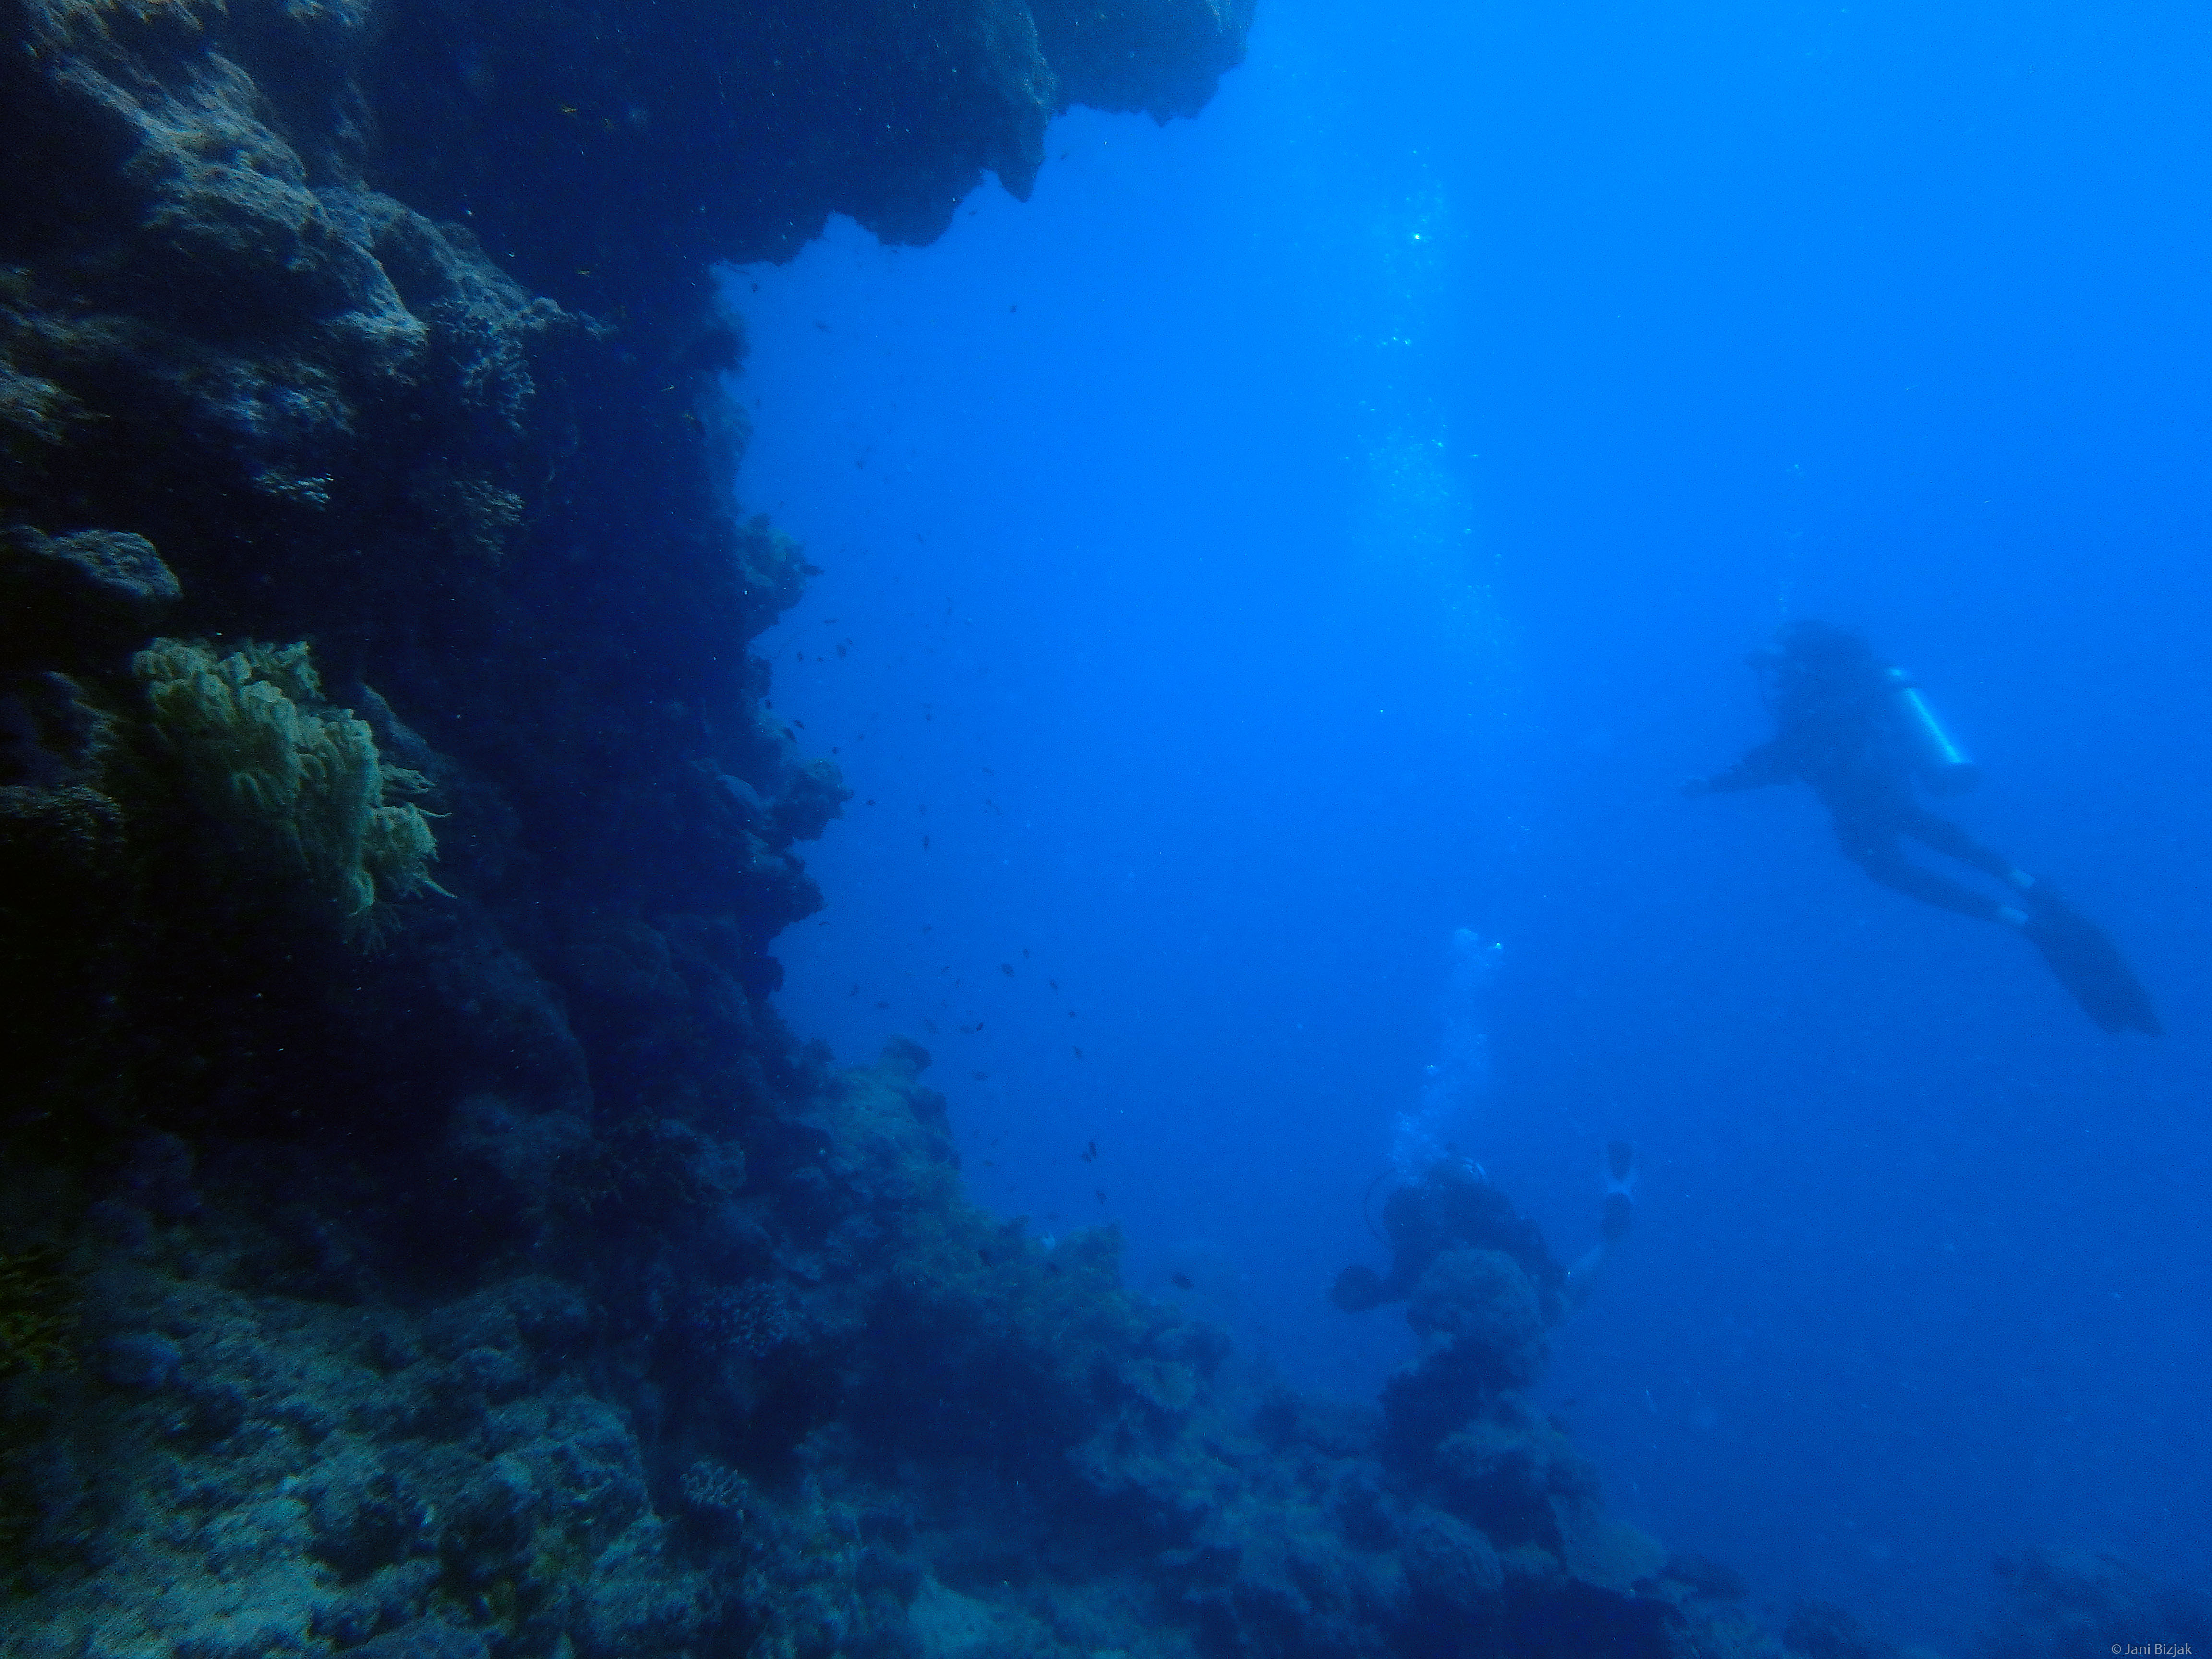 The water around the reef is quite shallow, we didn't go deeper than 10m and were most of the time at about 5m.